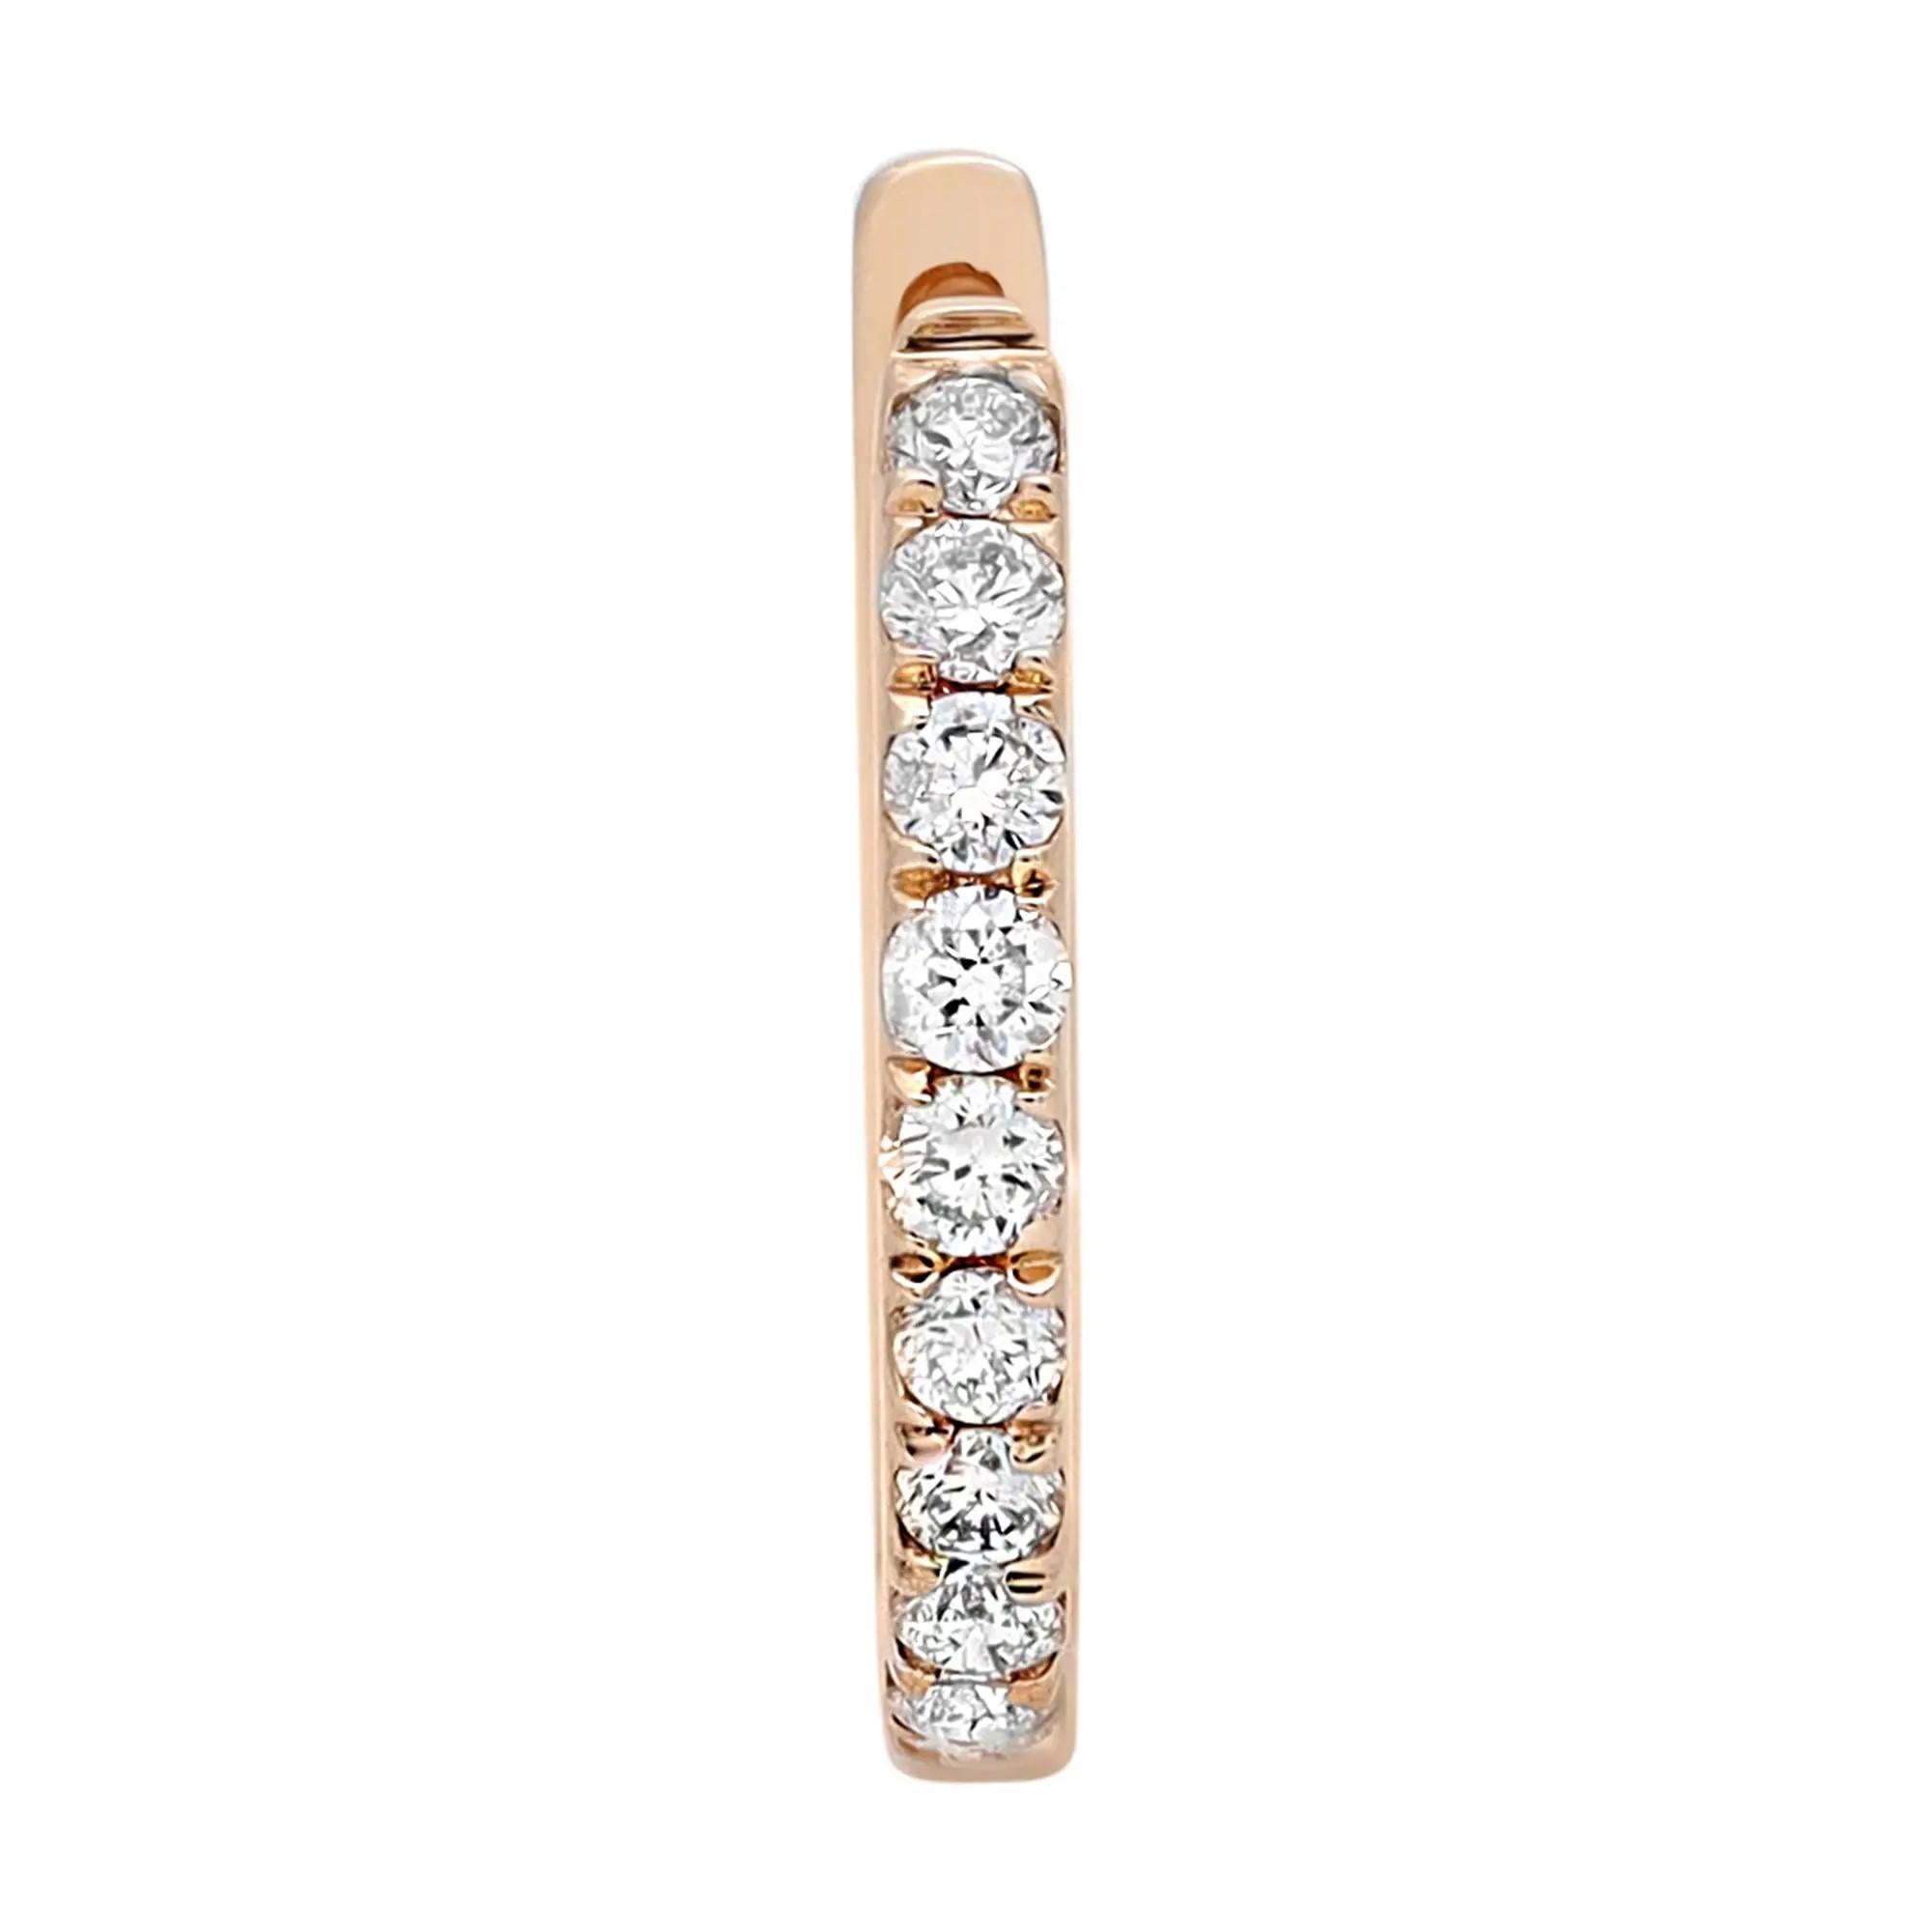 Sleek and classic, these timeless diamond huggie earrings are perfect for a great everyday look. Featuring a row of prong set bright white round cut diamonds set in lustrous 14K yellow gold. Total diamond weight: 0.21 carat. Diamond quality: Color